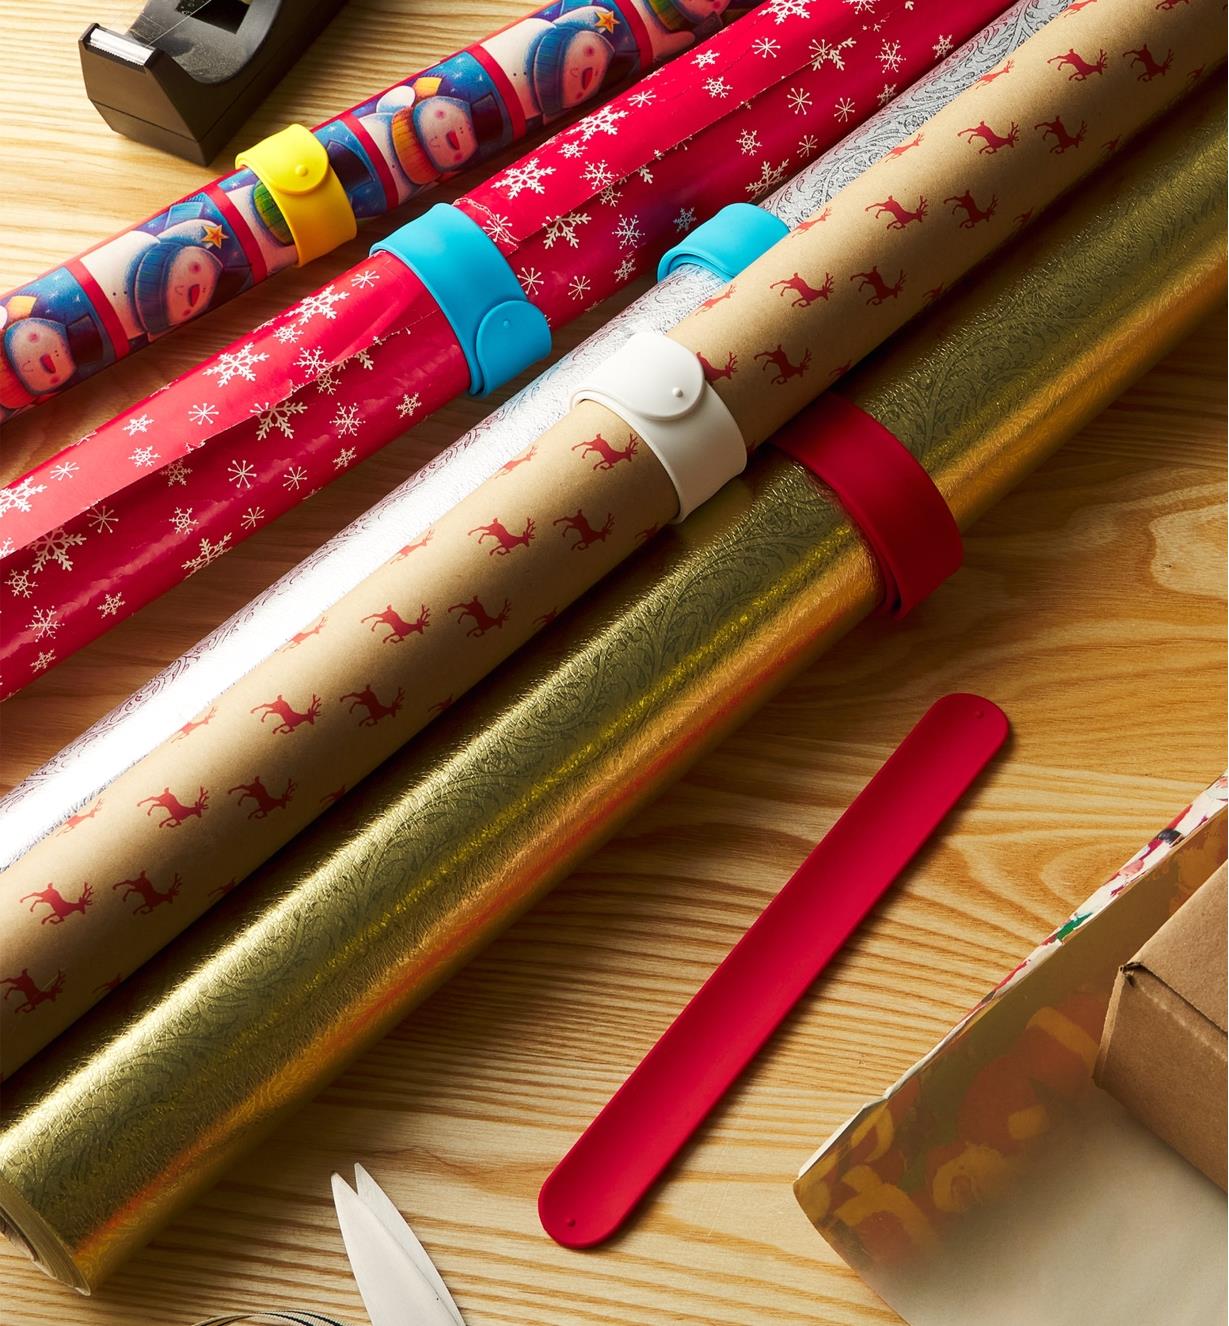 Slap bands used to keep rolls of wrapping paper neatly bundled